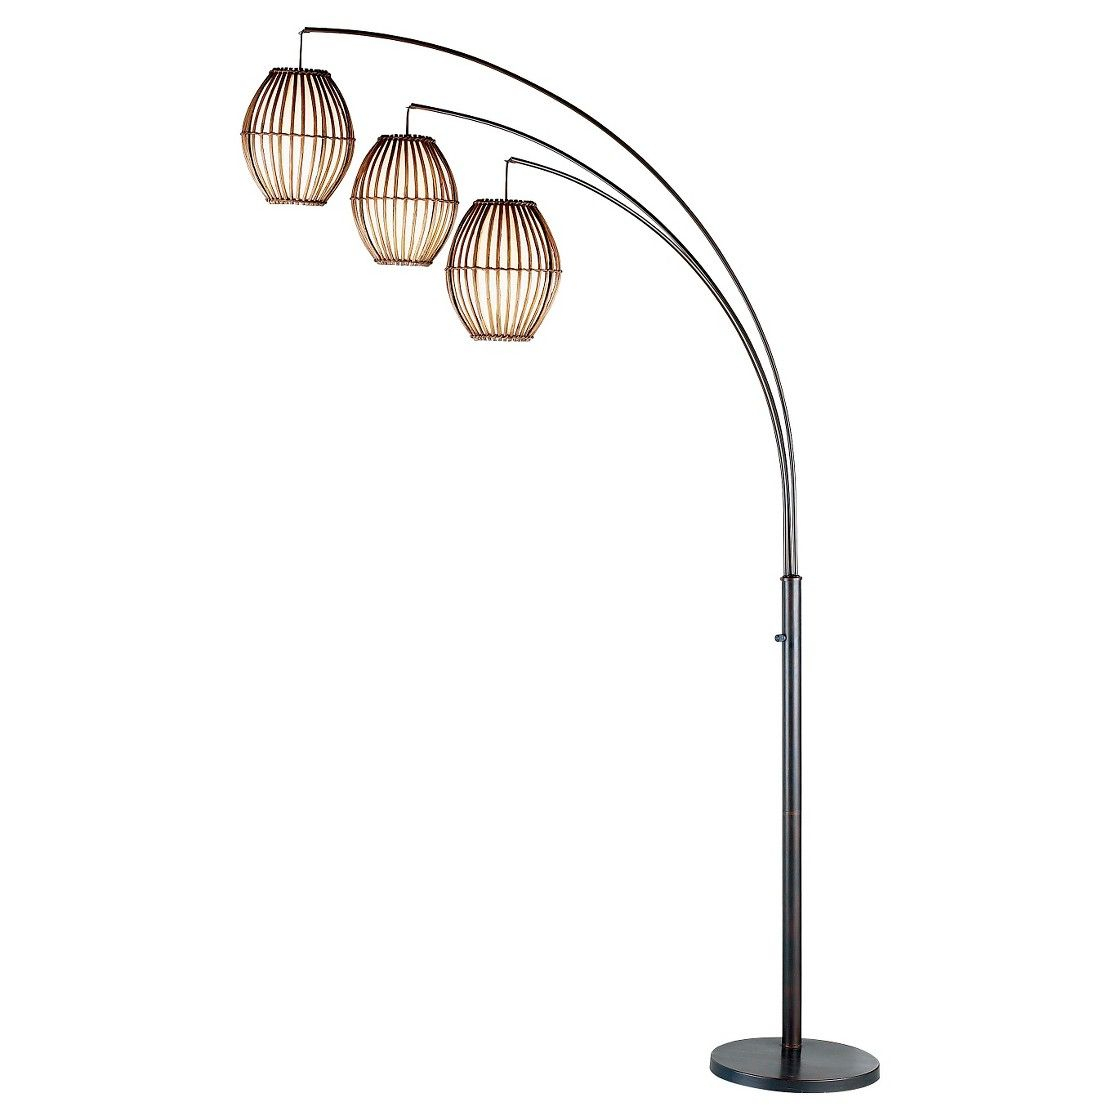 Adesso Maui Arc Lamp Brown Living In 2019 Arc Floor intended for size 1120 X 1120